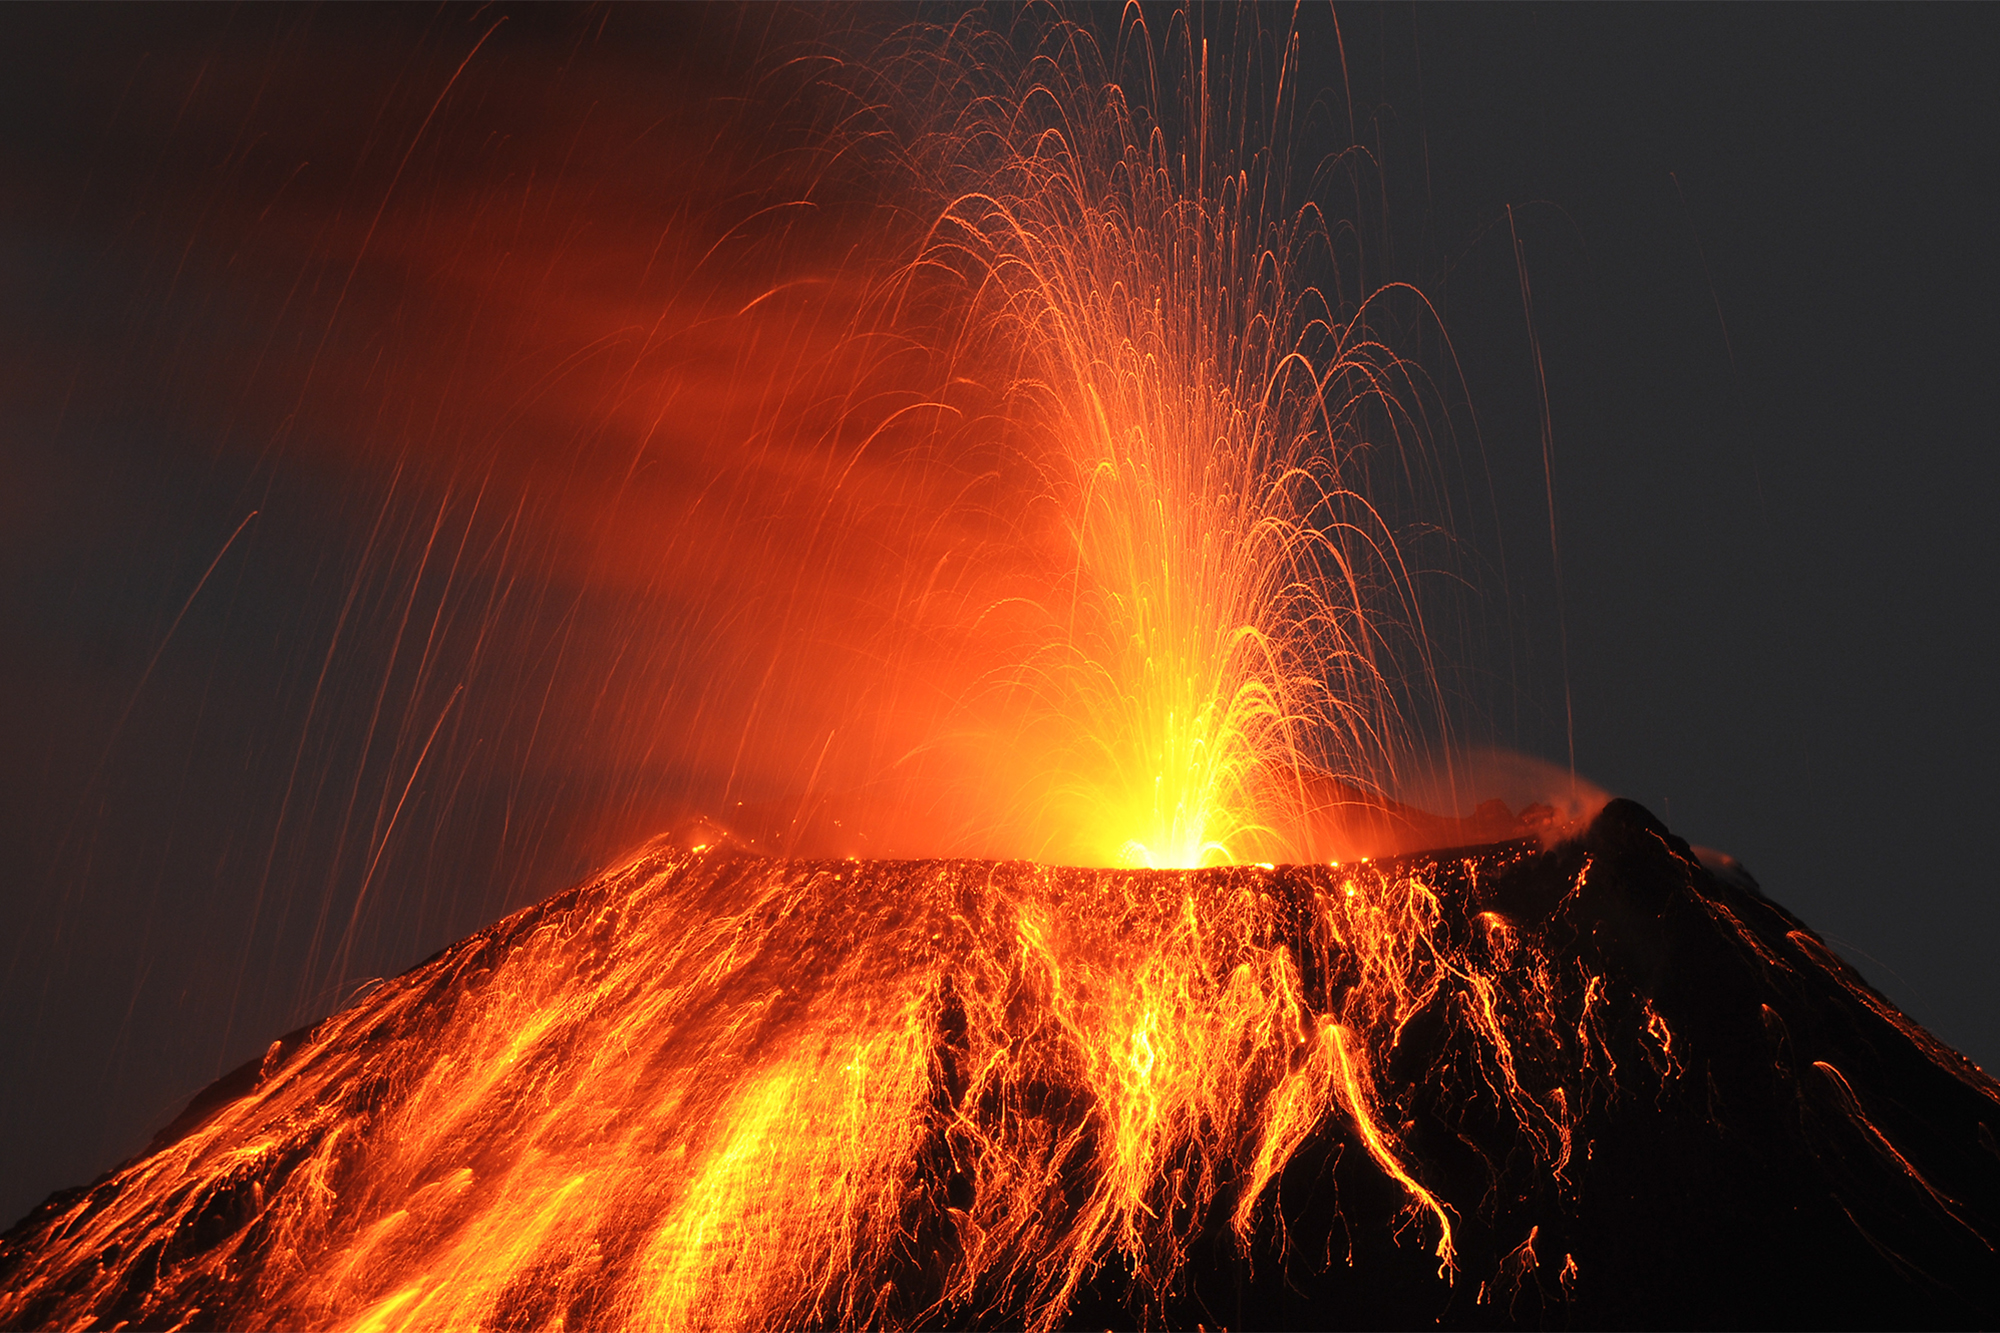 do all volcanos make noise when they erupt